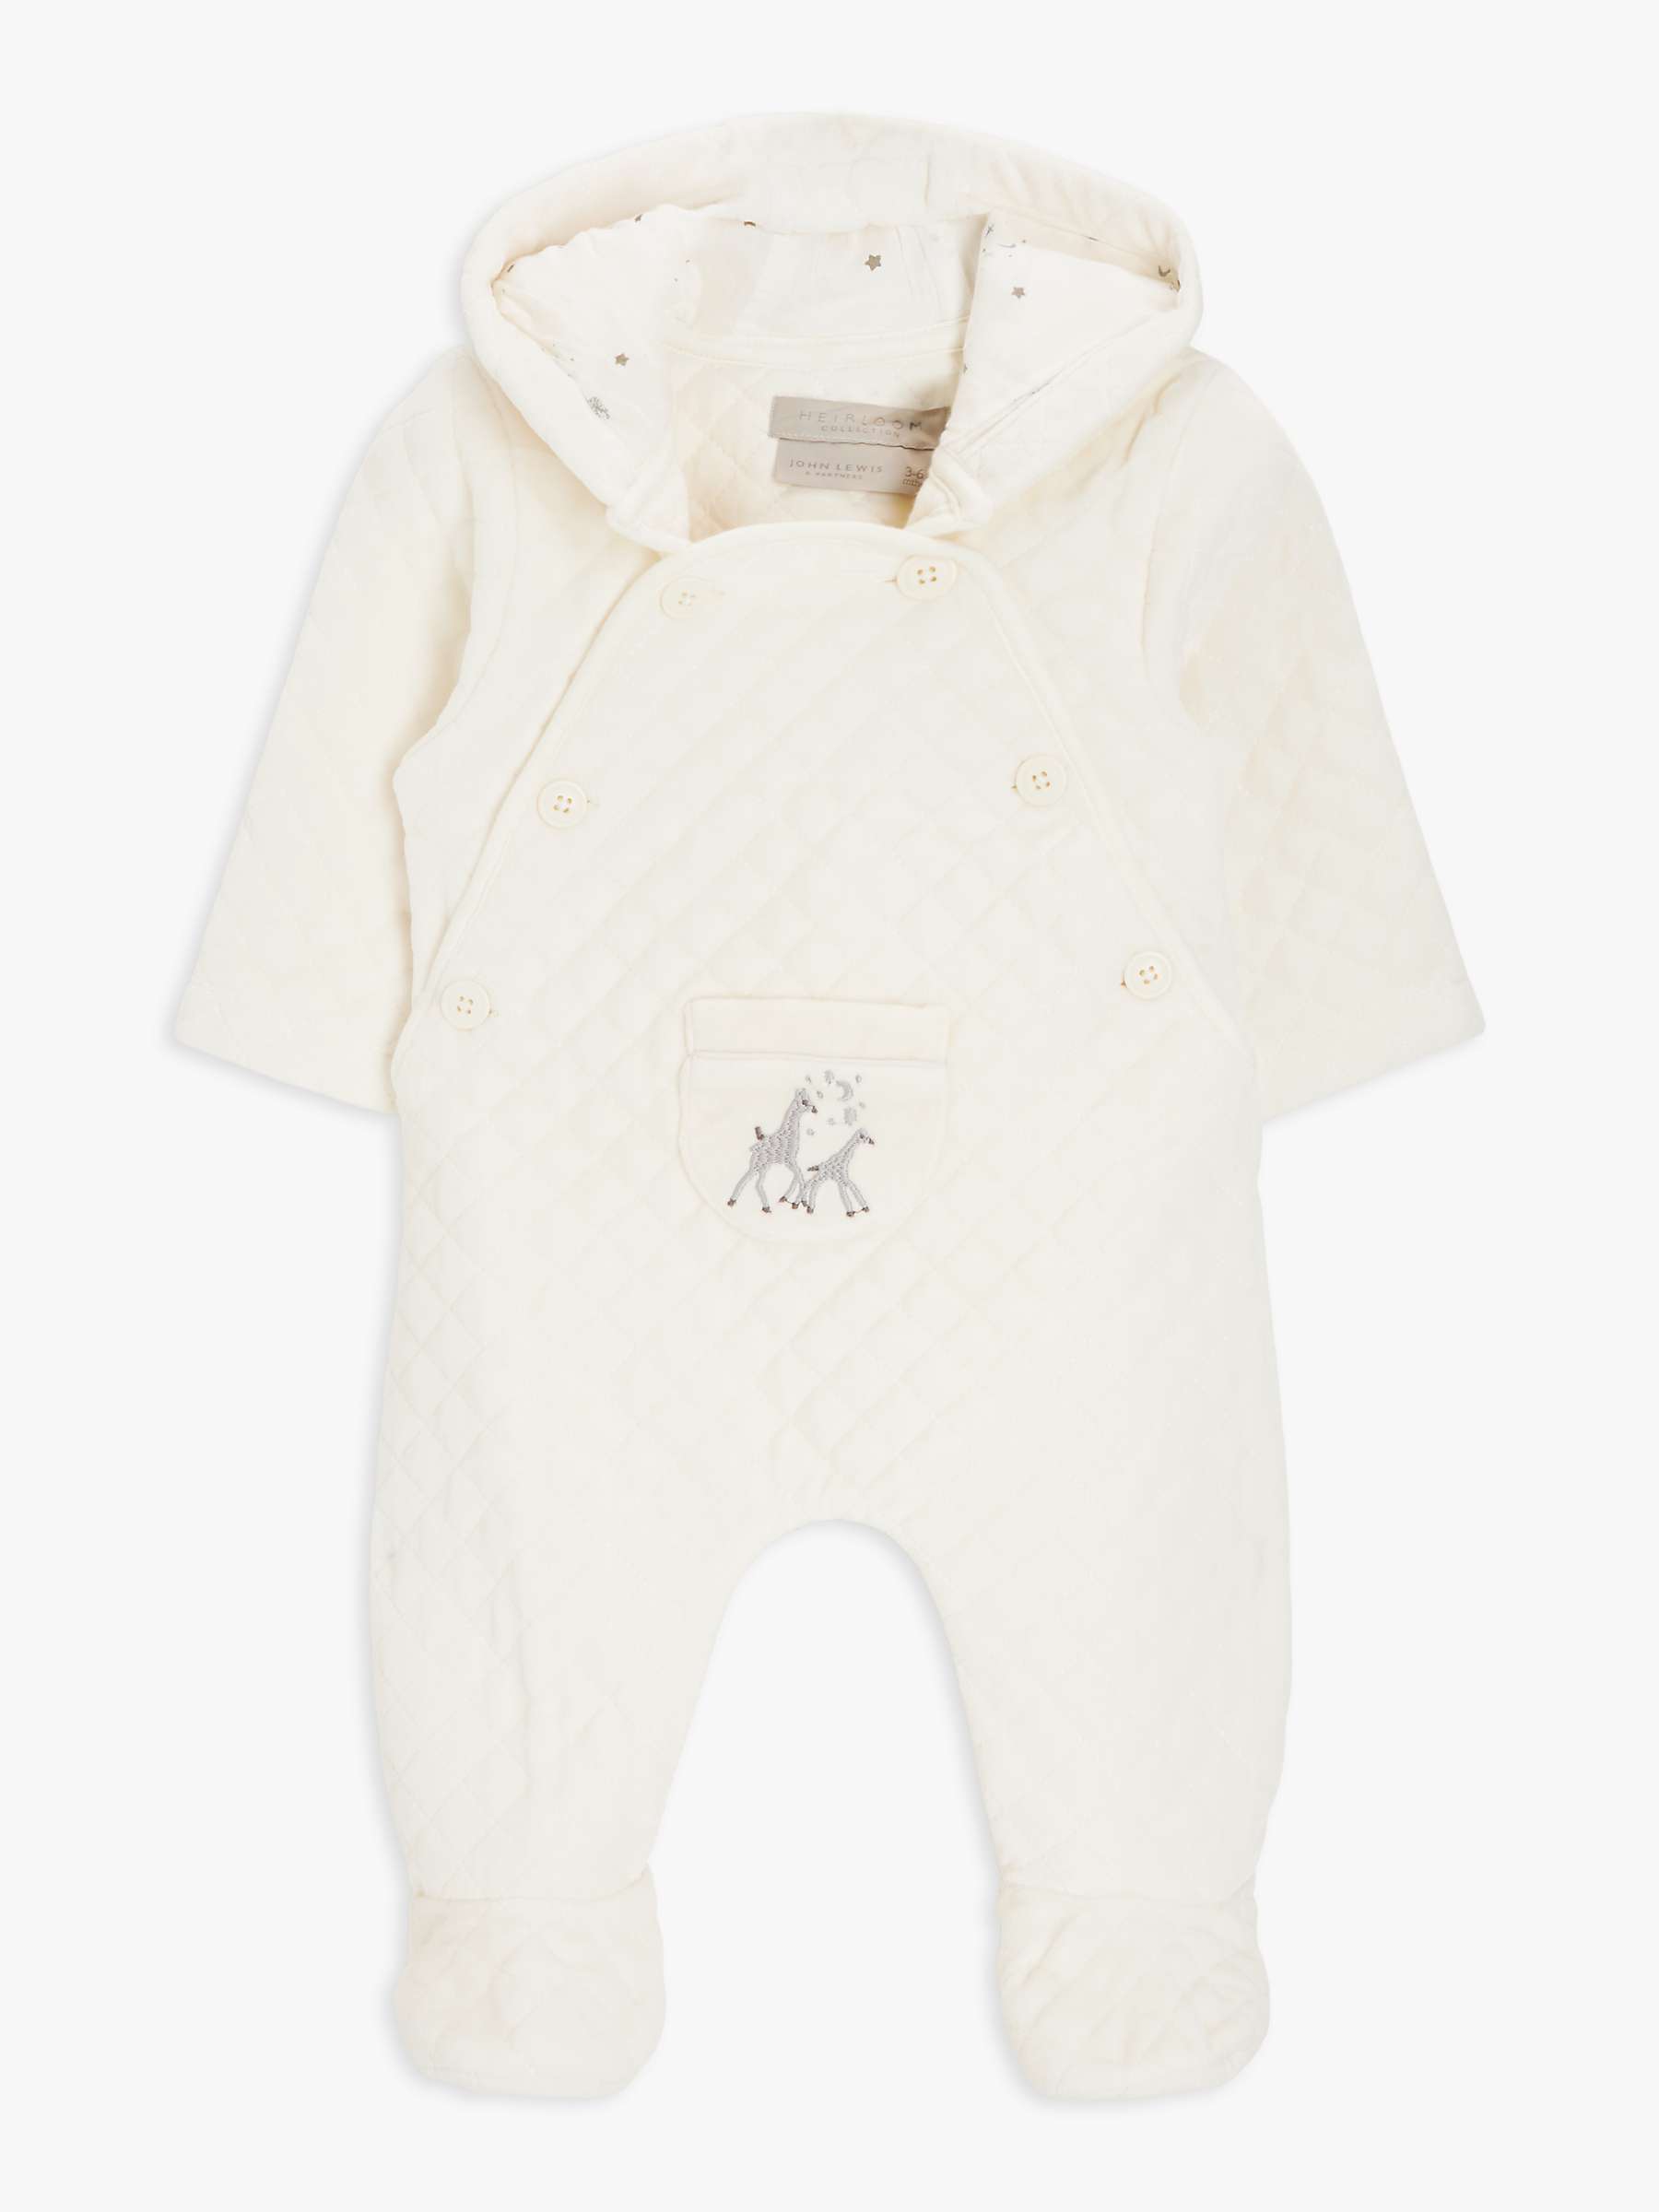 Buy John Lewis Heirloom Collection Baby Embroidered Pramsuit, White Online at johnlewis.com